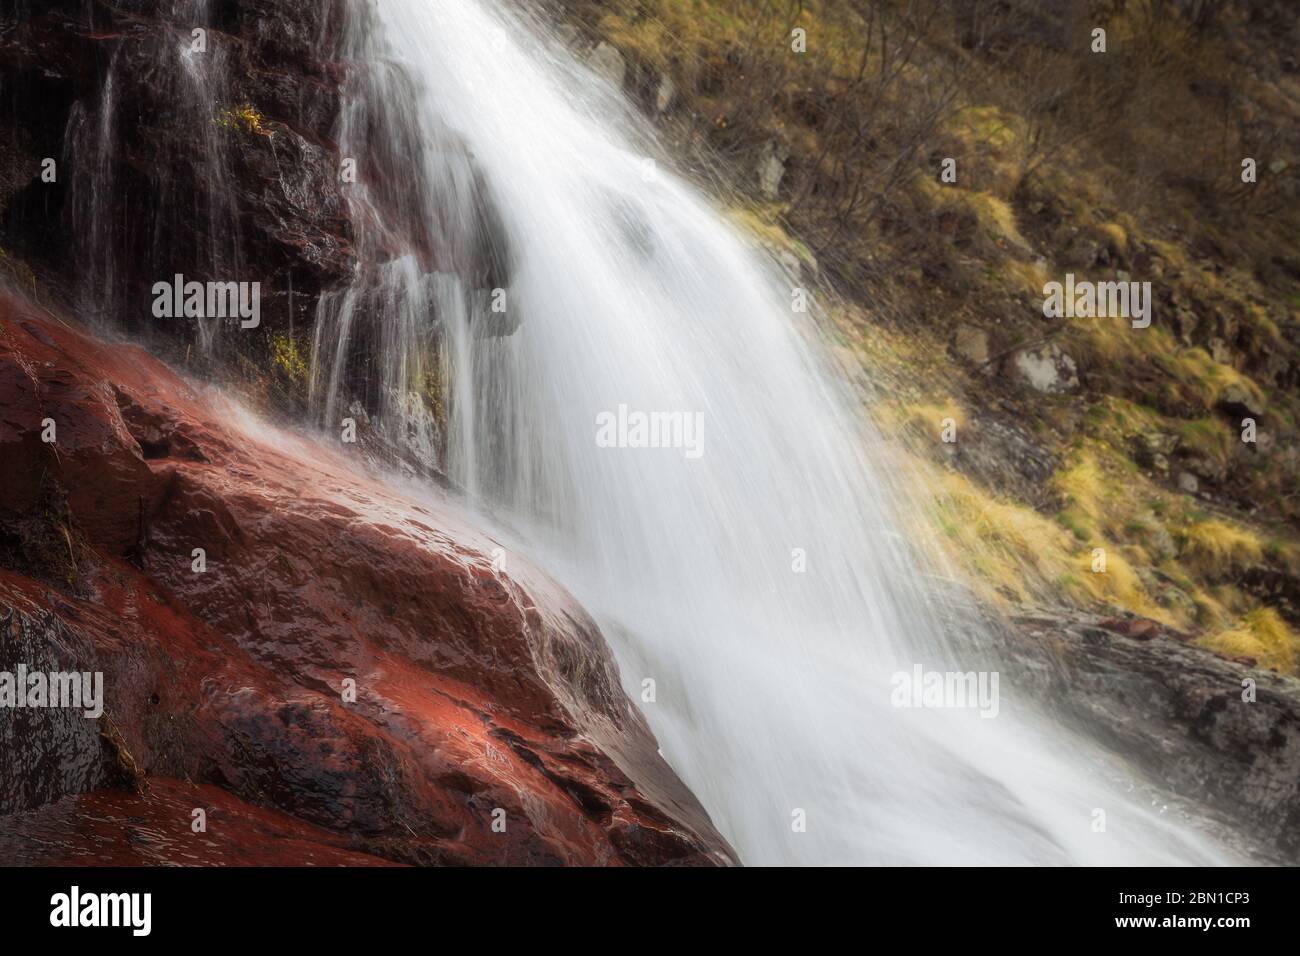 Stunning close up details of powerful waterfall cascading down the red, wet rocks and soft, background sunit golden grass Stock Photo